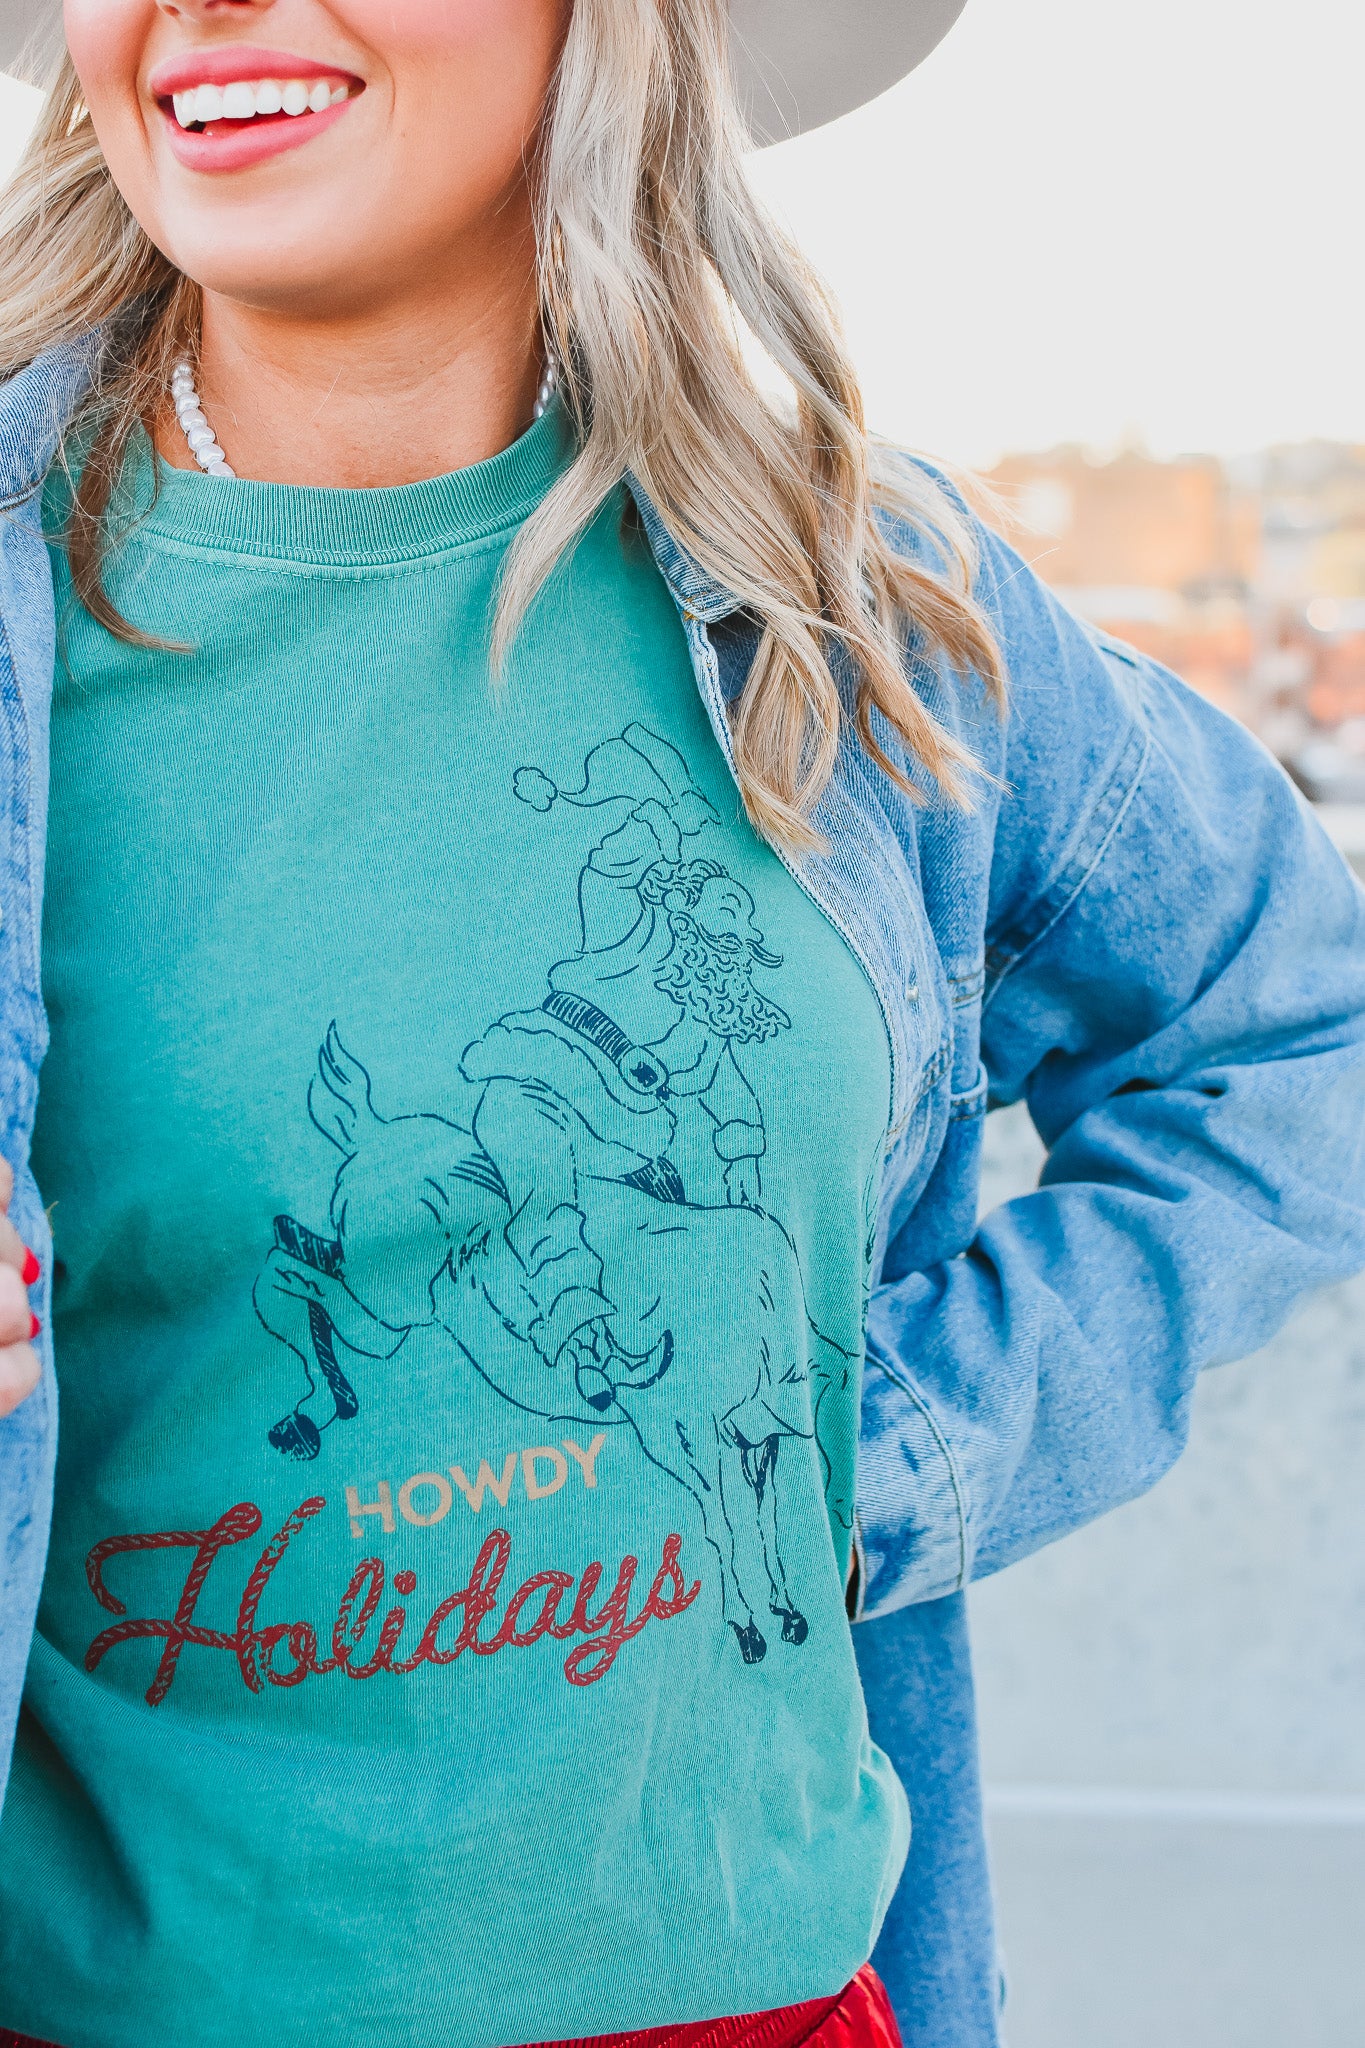 Howdy Holidays Graphic Tee